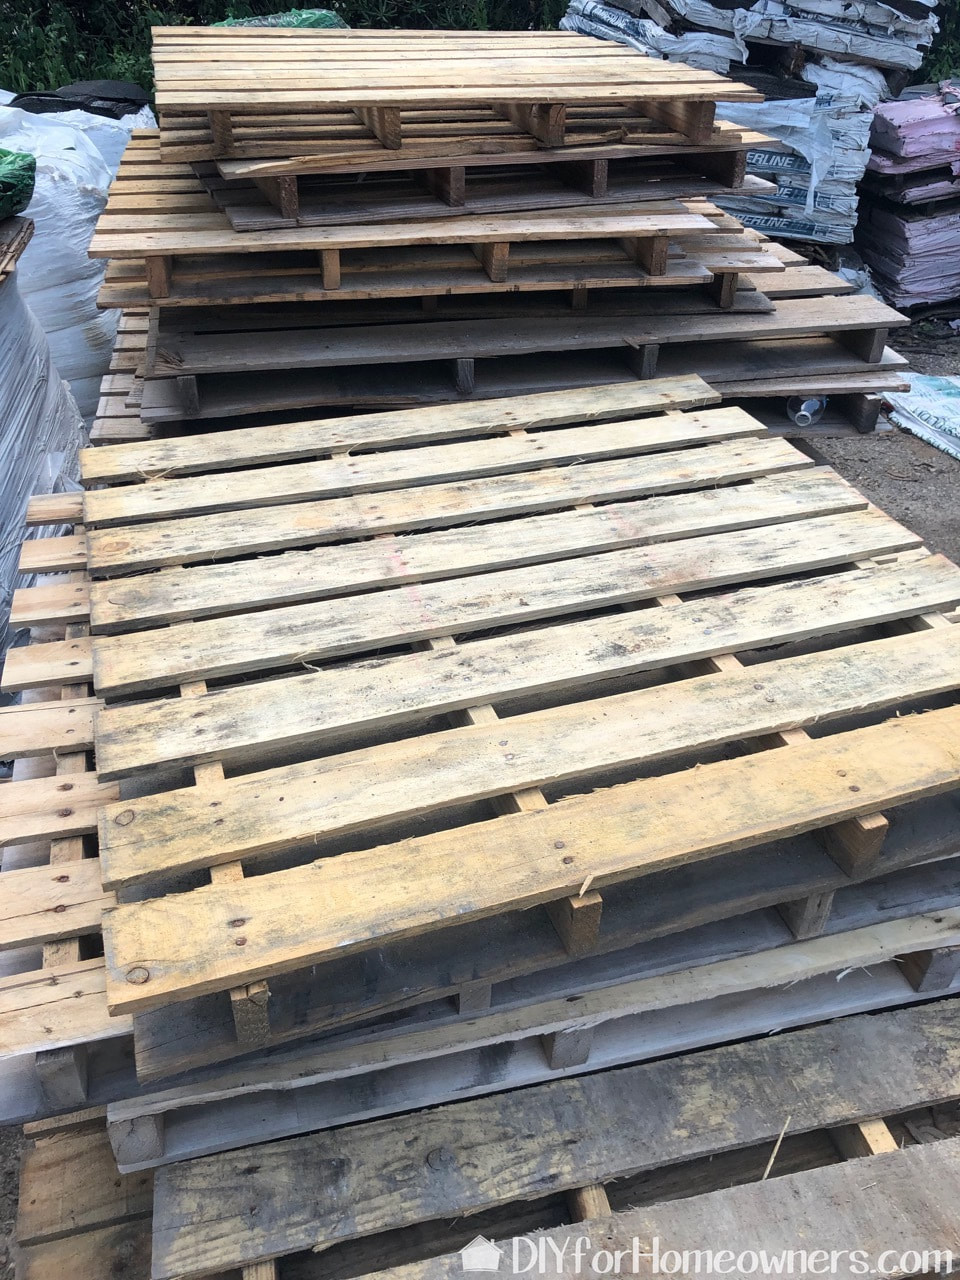 Piles of pallets ready for DIY projects!